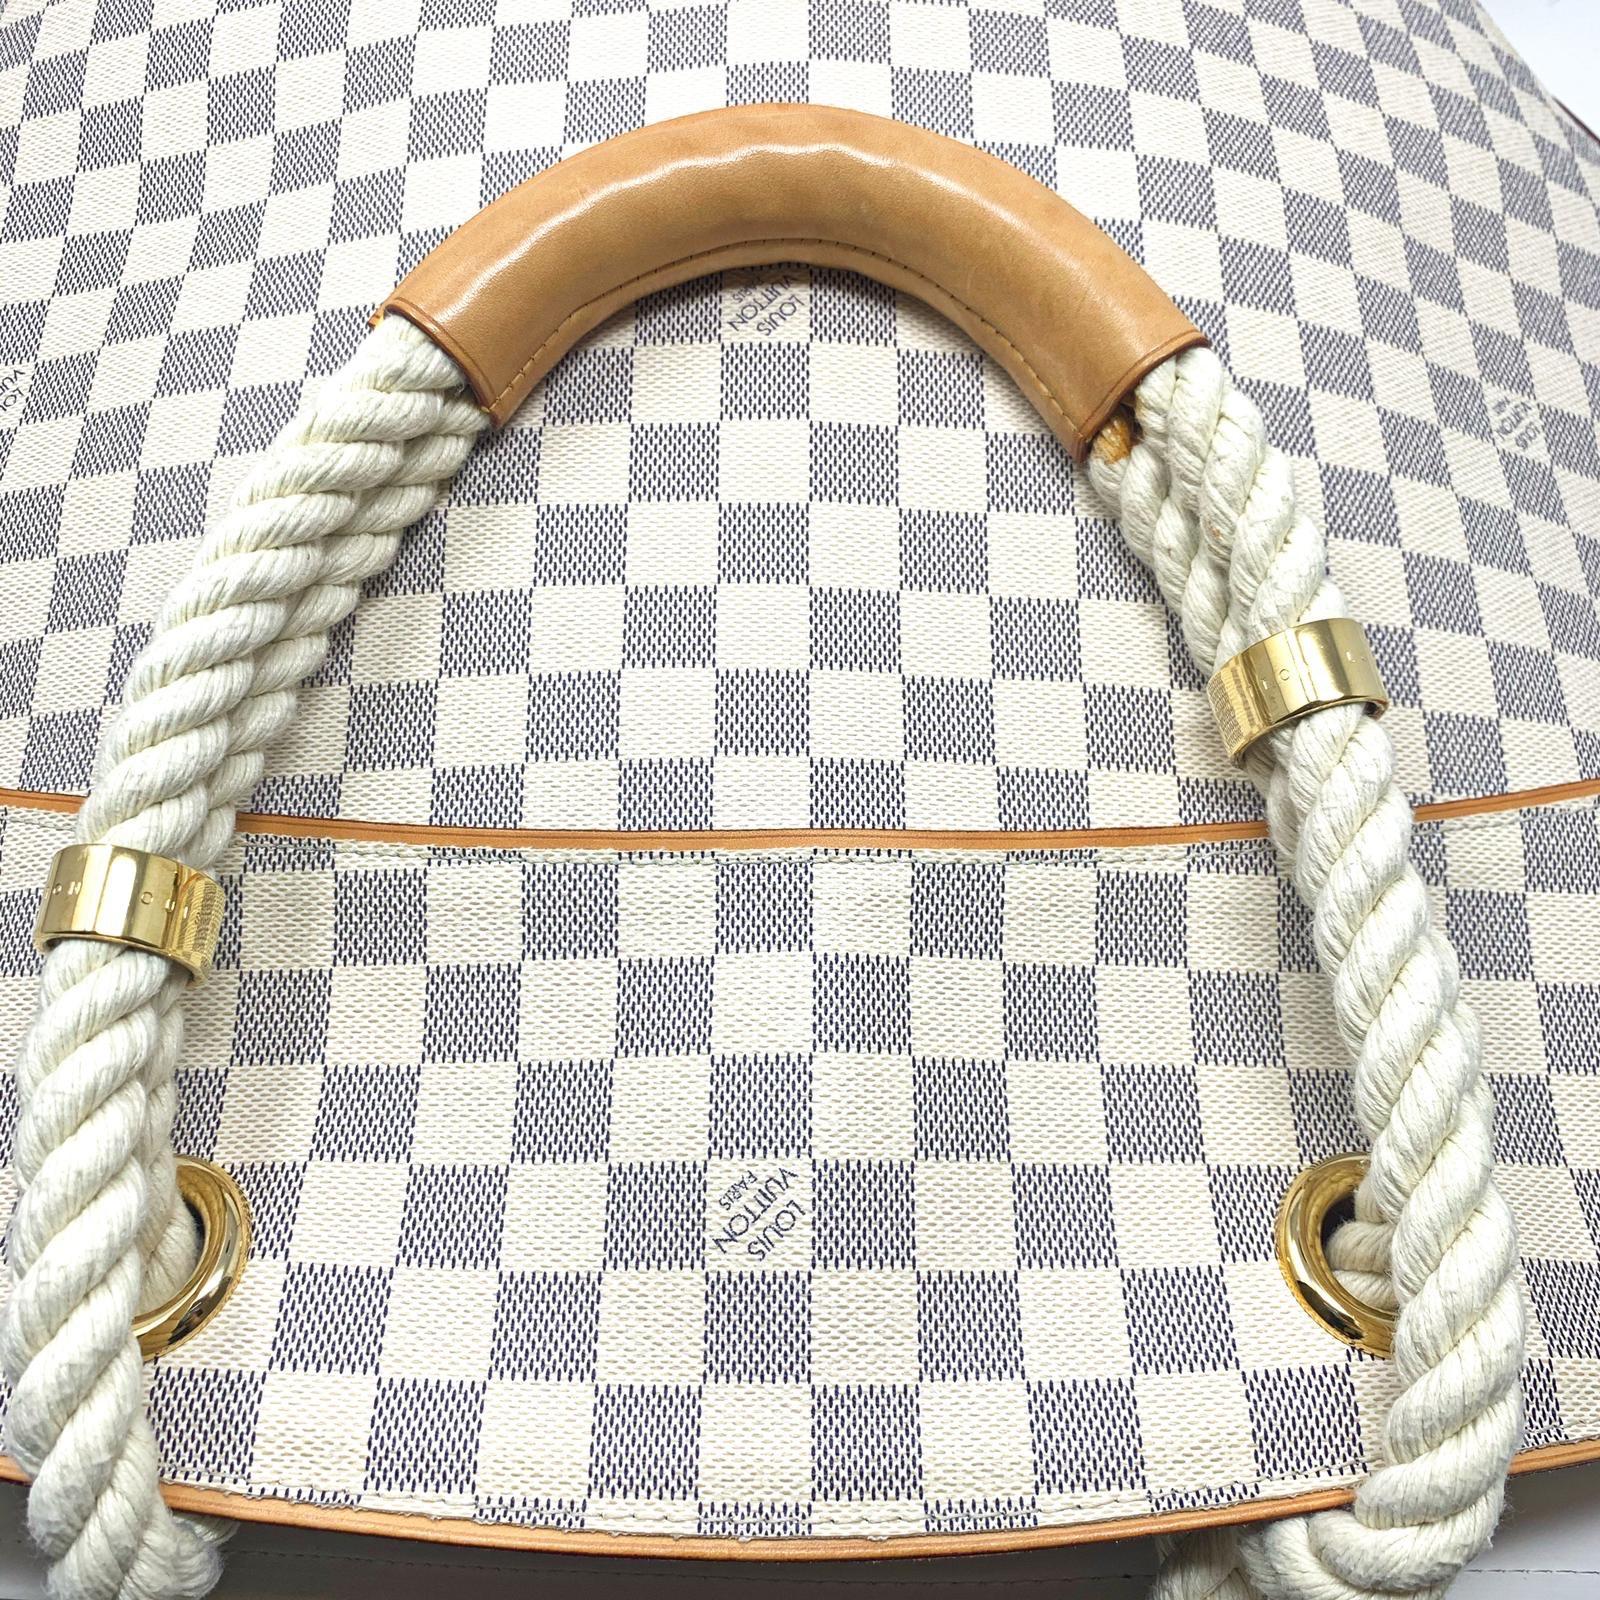 The GM Pampelonne Damier Azure Canvas bag is from the Cruise 2007 collection and features natural leather finishes, double-rope handles with leather rings and gold brass engraved 'Louis Vuitton'. The spacious interior features four large flat